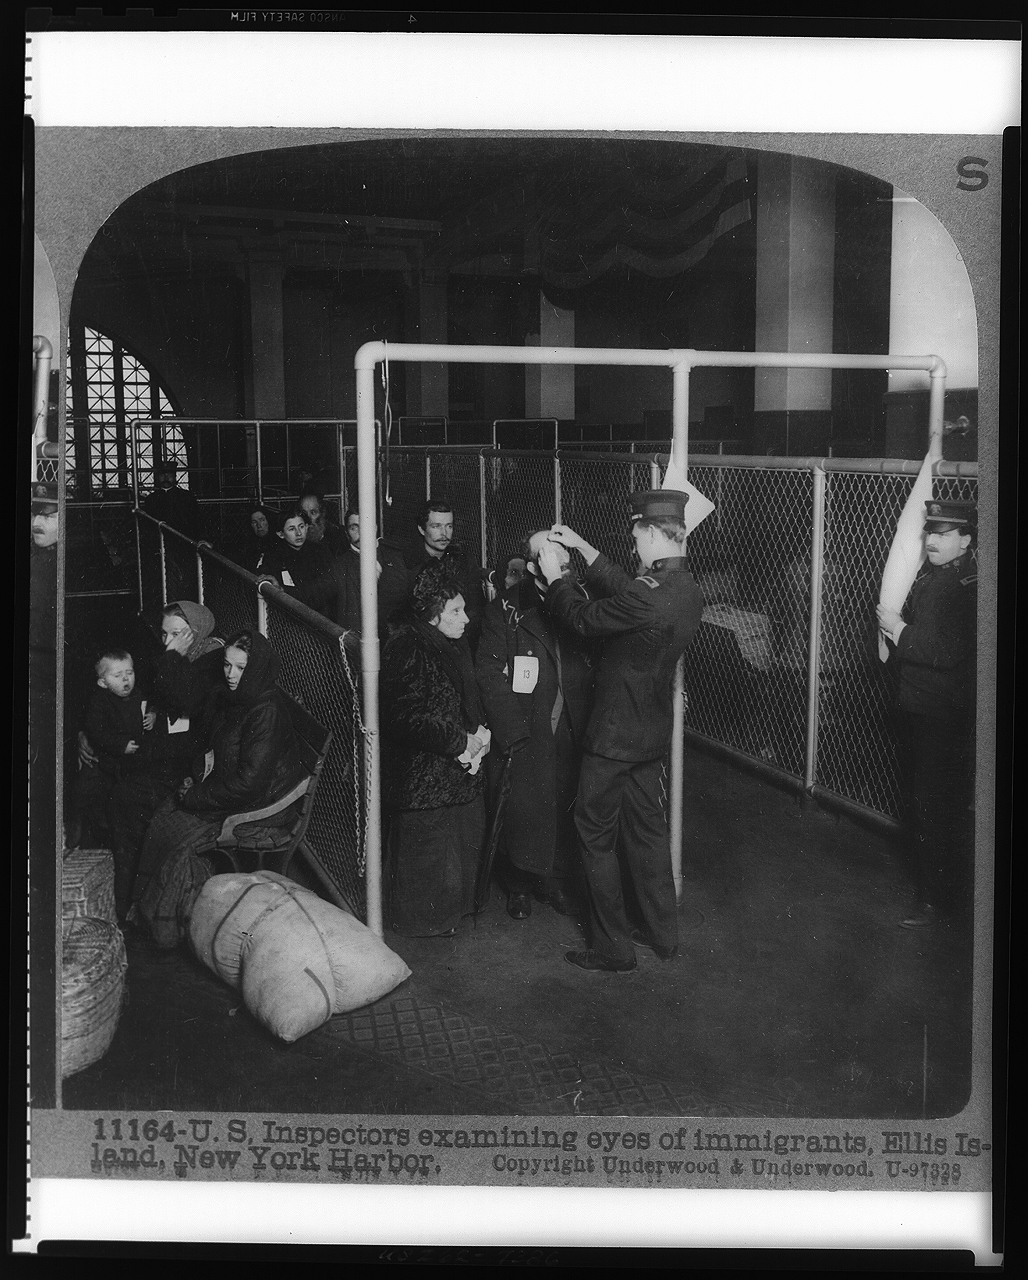 A large hall in Ellis Island Immigration center. Chain linked fence walls divide different lines of immigrants. Two women with a baby sit to the left of the lines on a bench. Two uniformed inspectors stand at the front of the lines, and one uses tools to inspect the eyes of the line of immigrants. Men, women, and children stand in a line with papers pinned to their clothes indicating their immigration information. 